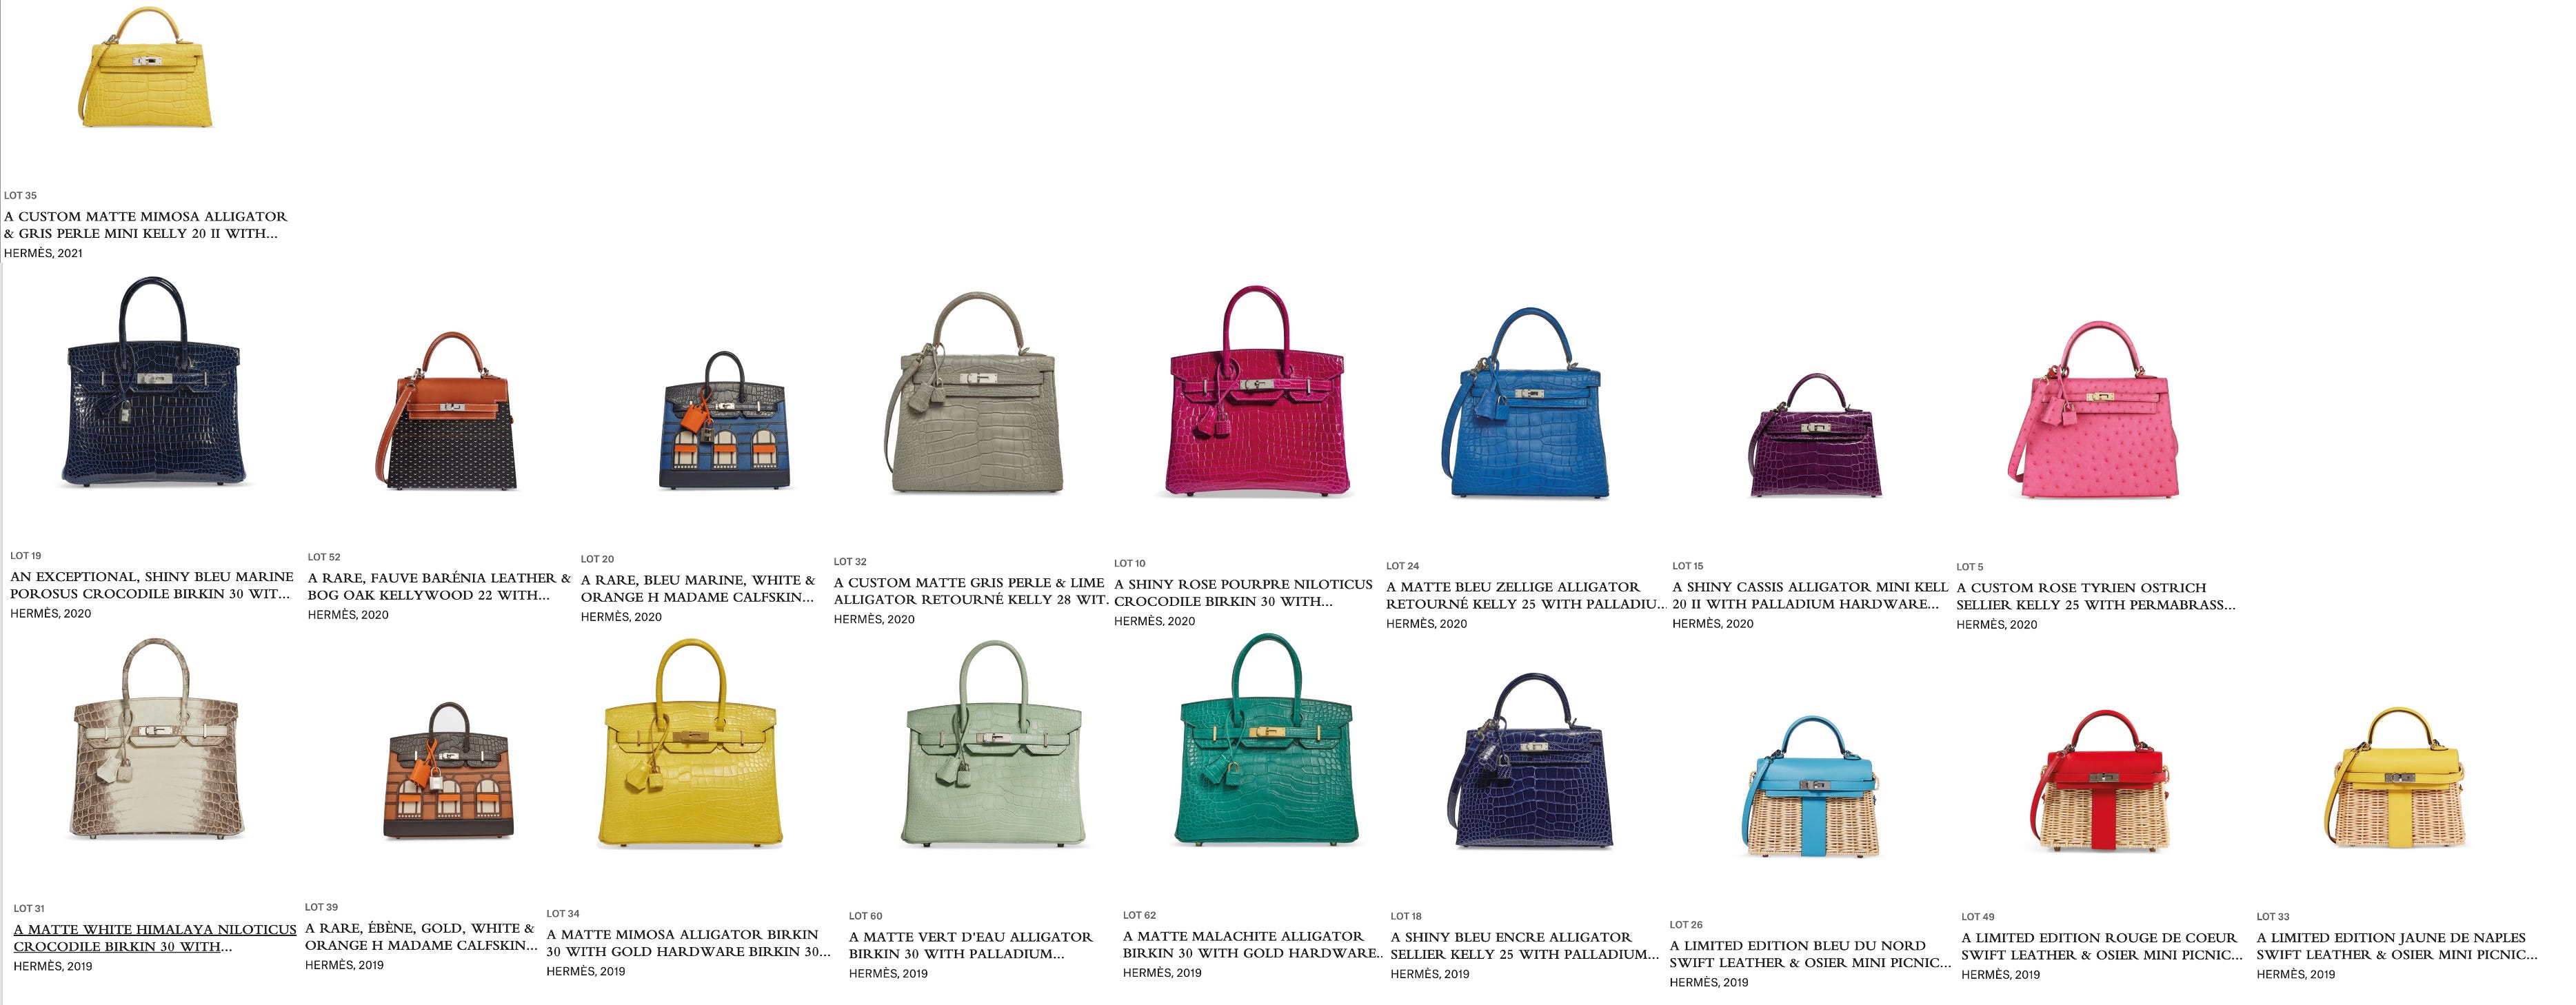 Christie's Most Collectible Bags Auction - by Max Hunnter